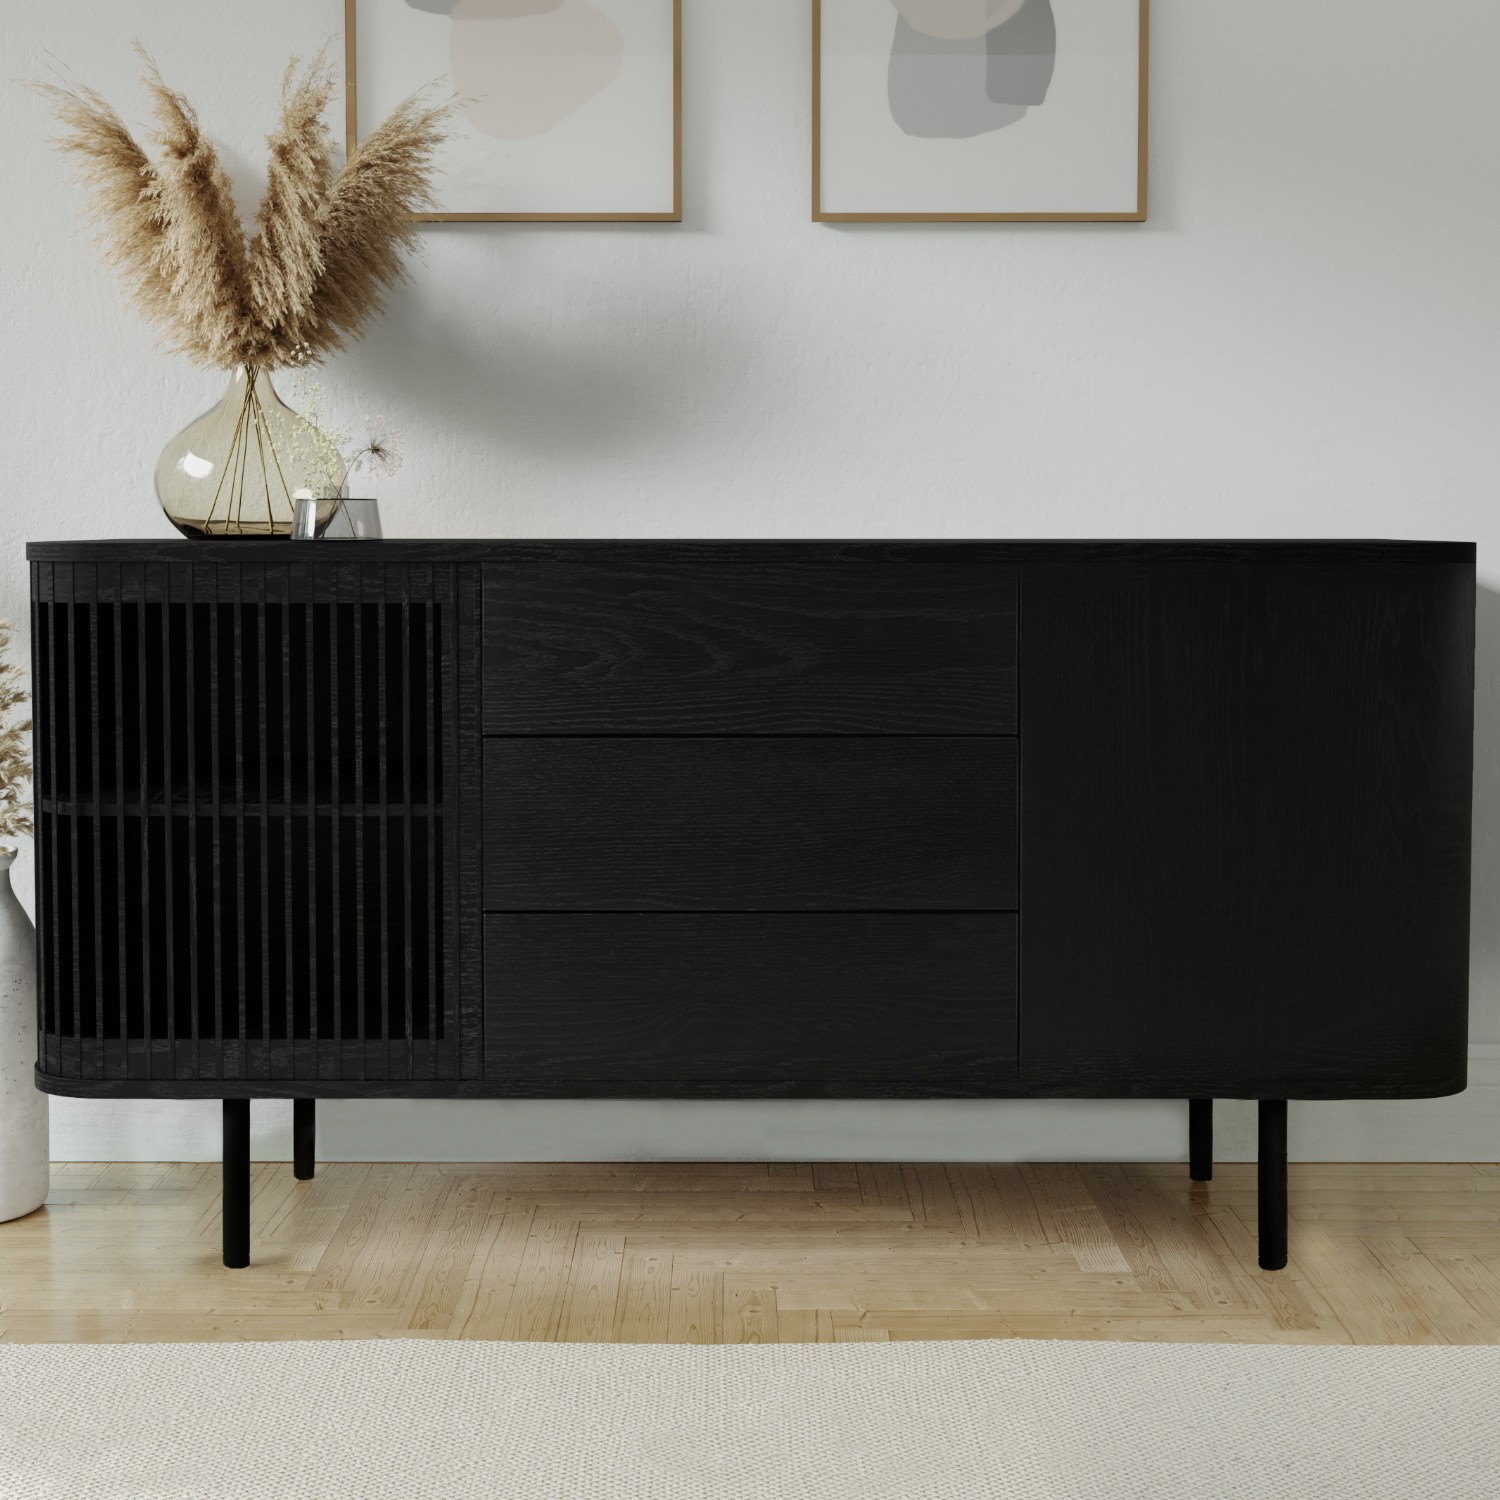 Read more about Large black wooden sideboard with drawers jarel